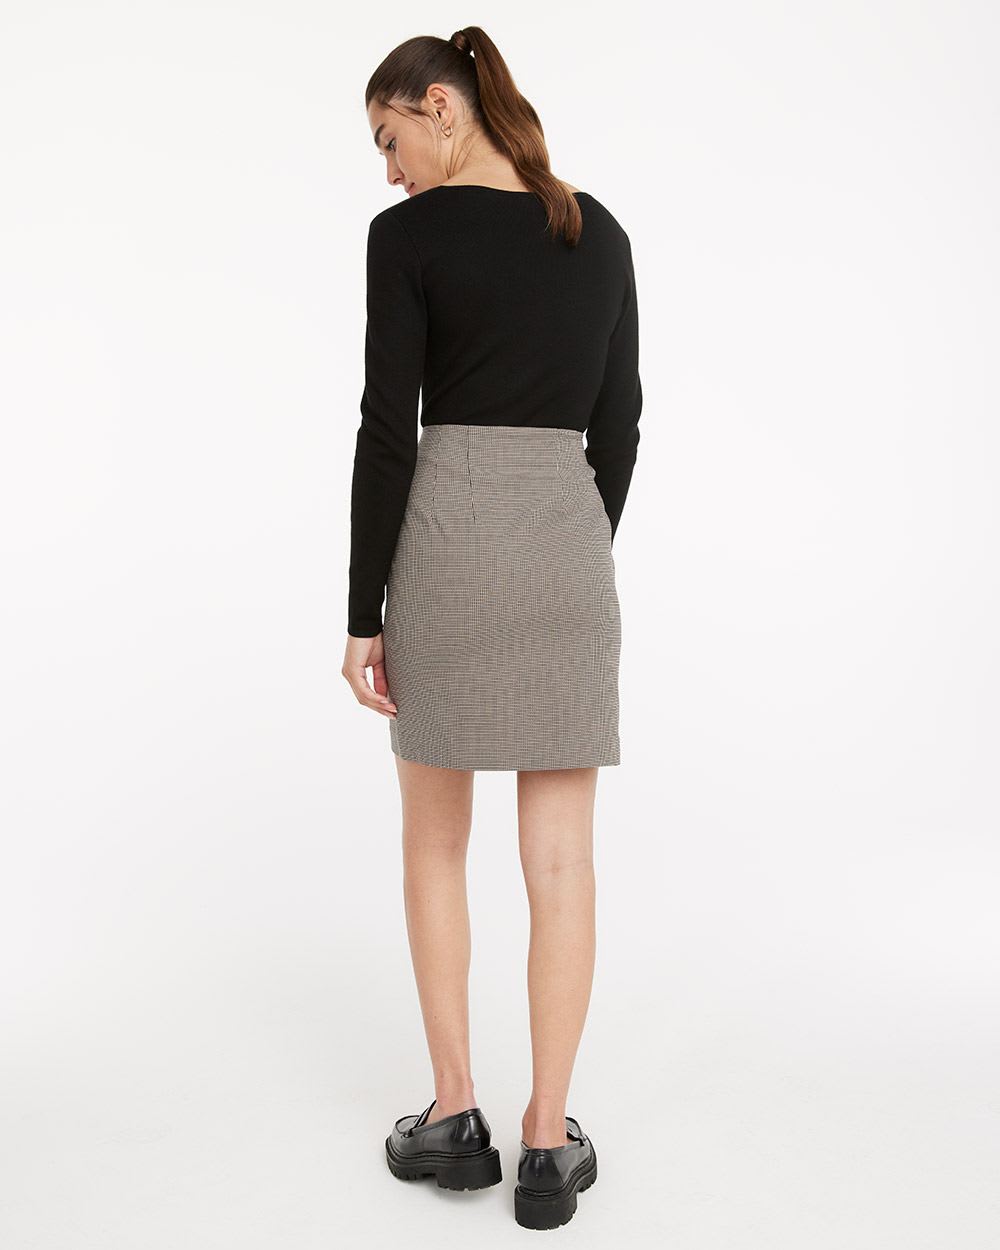 Pattern Pencil Skirt, The Iconic